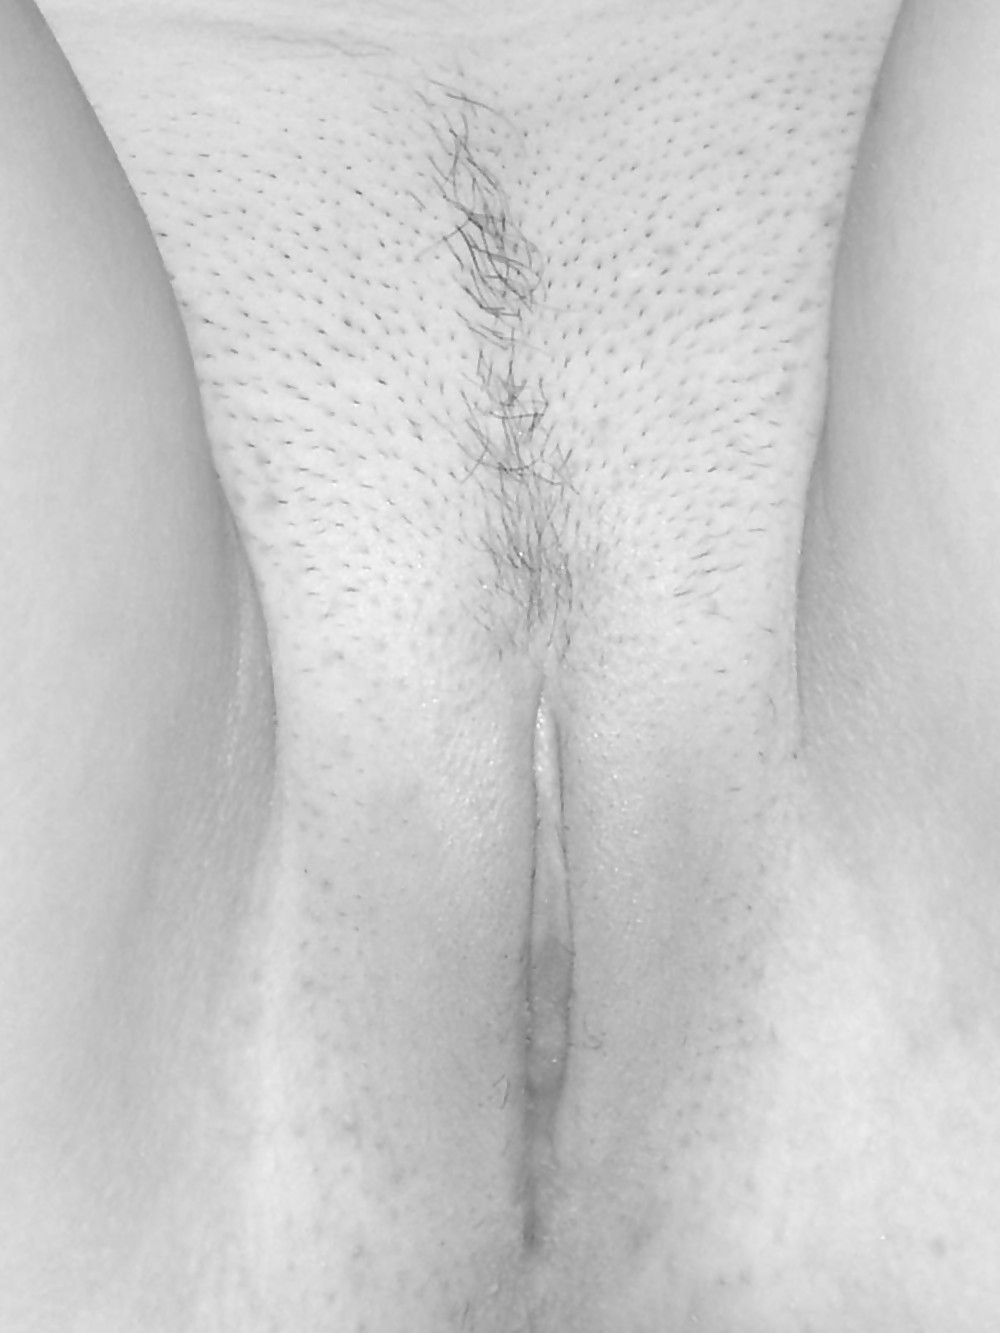 Sex Black and white pussy closeups image